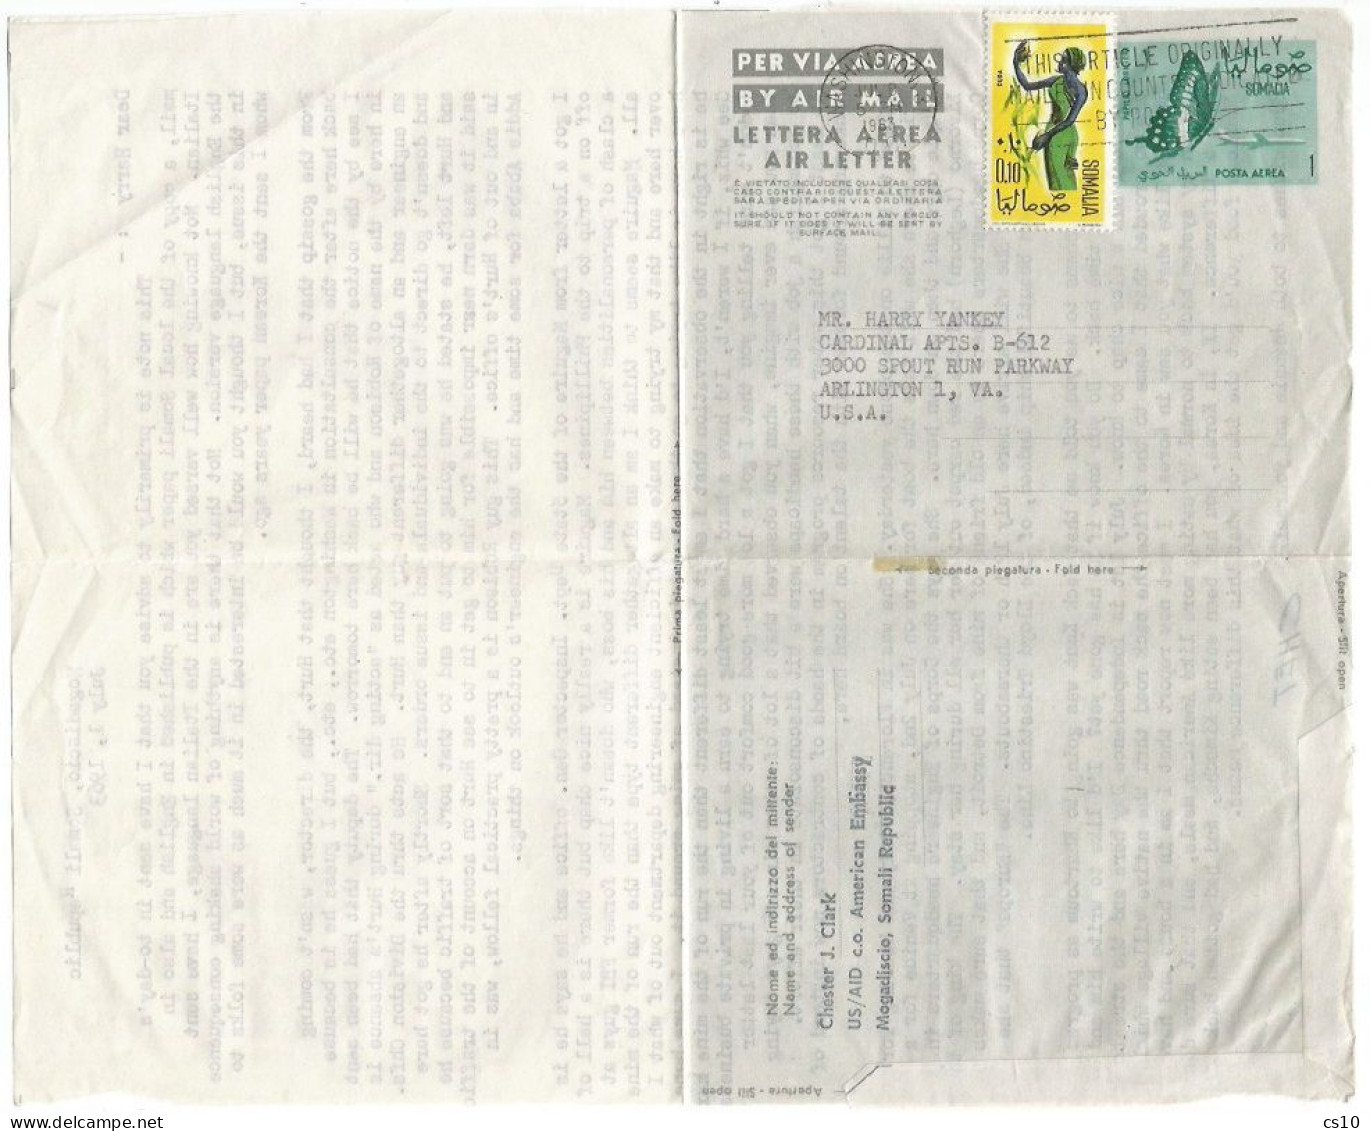 Somalia  Stationery Aerogramme Air Letter S.1 Butterfly  8jul1963 To USA Uprated With Regular S.0.10 - Somalia (1960-...)